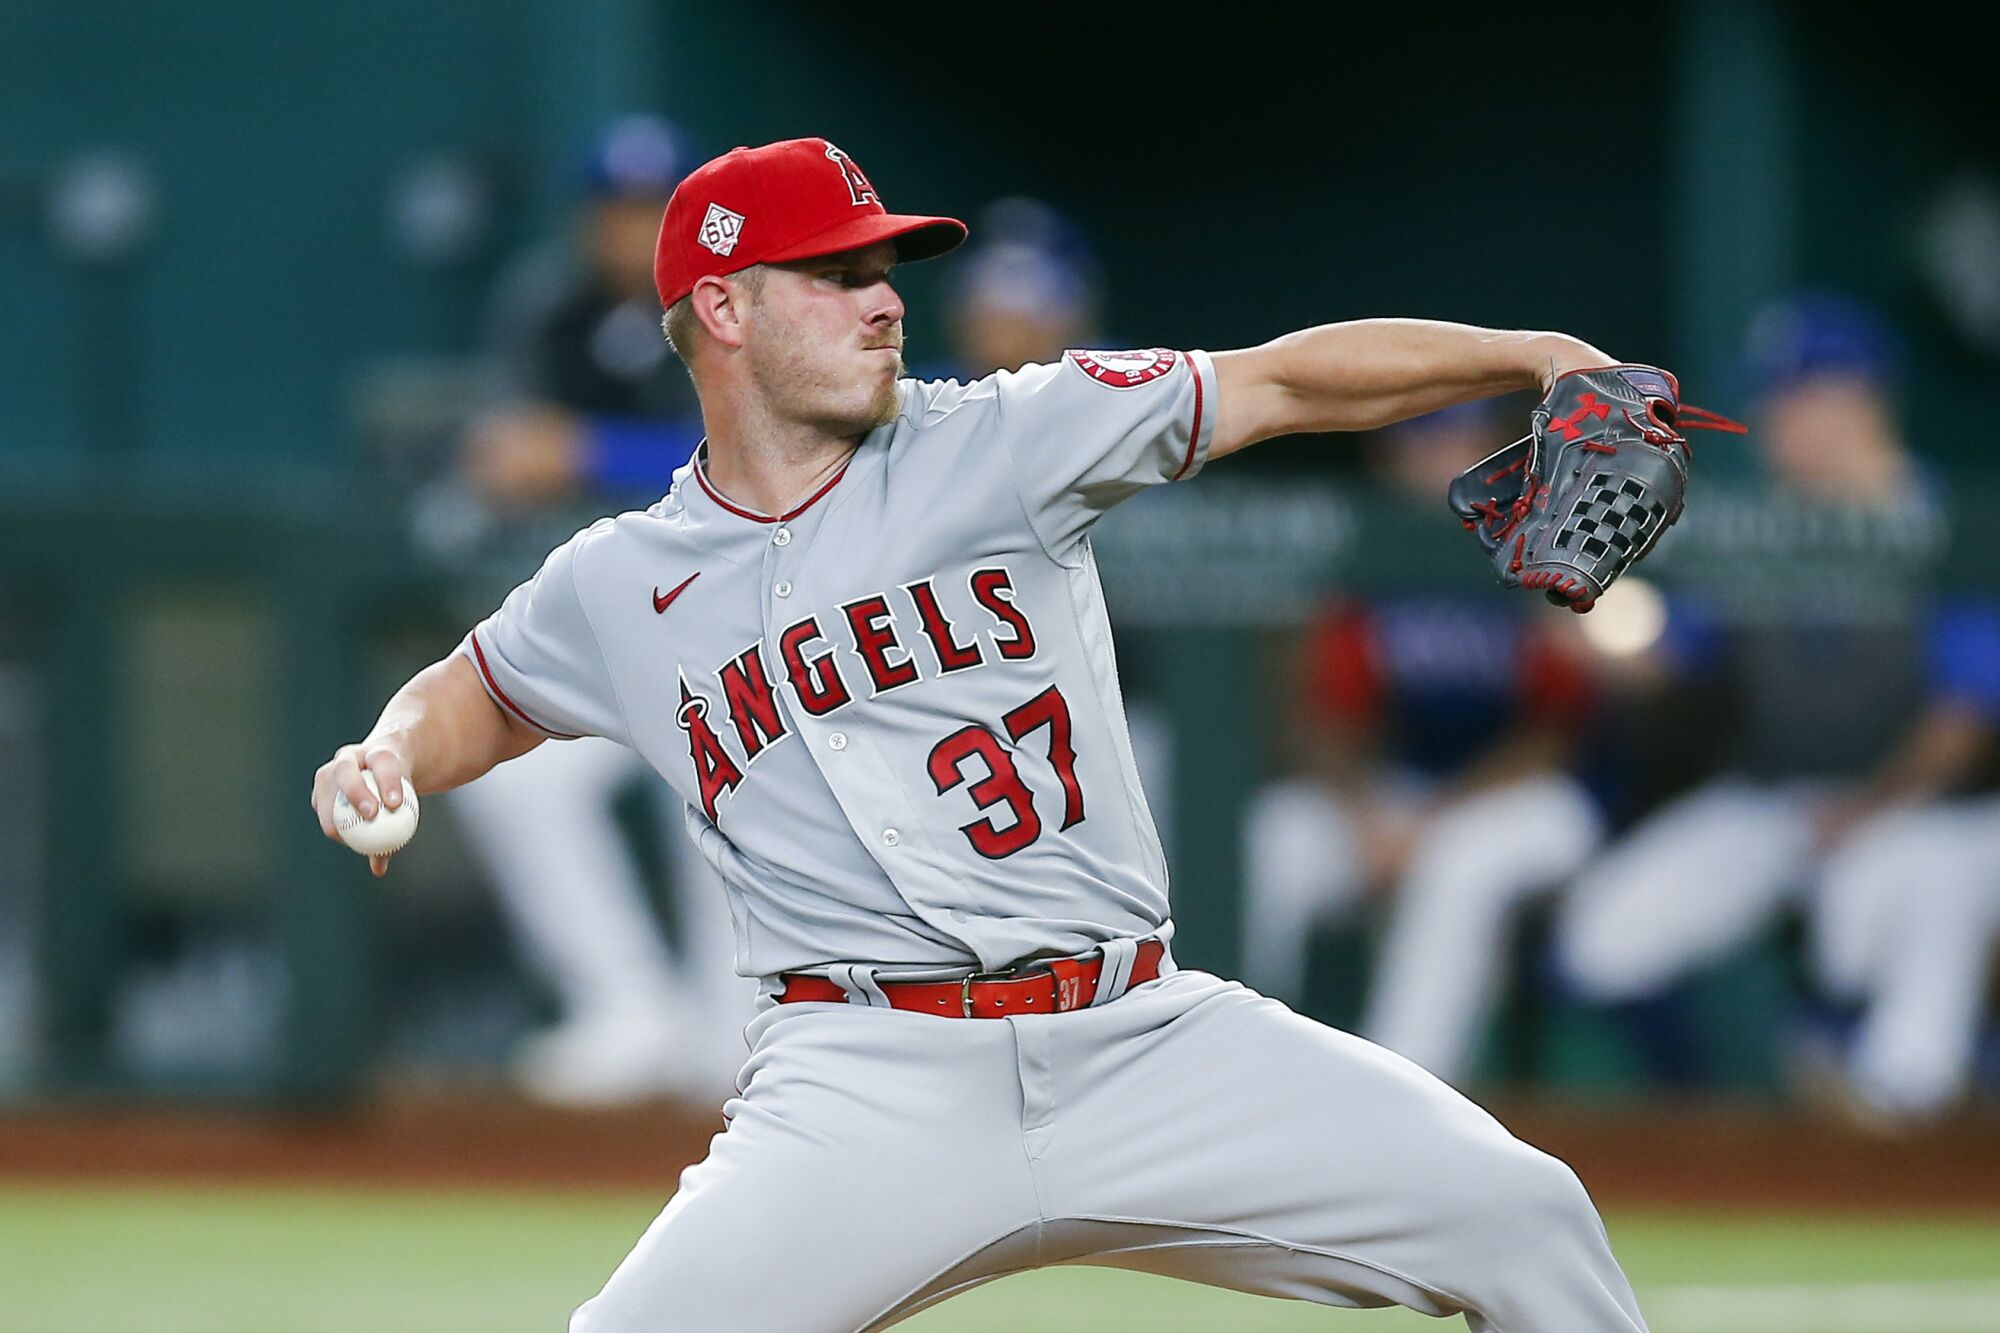 Angels right-hander Dylan Bundy throws a pitch in the first inning Thursday.